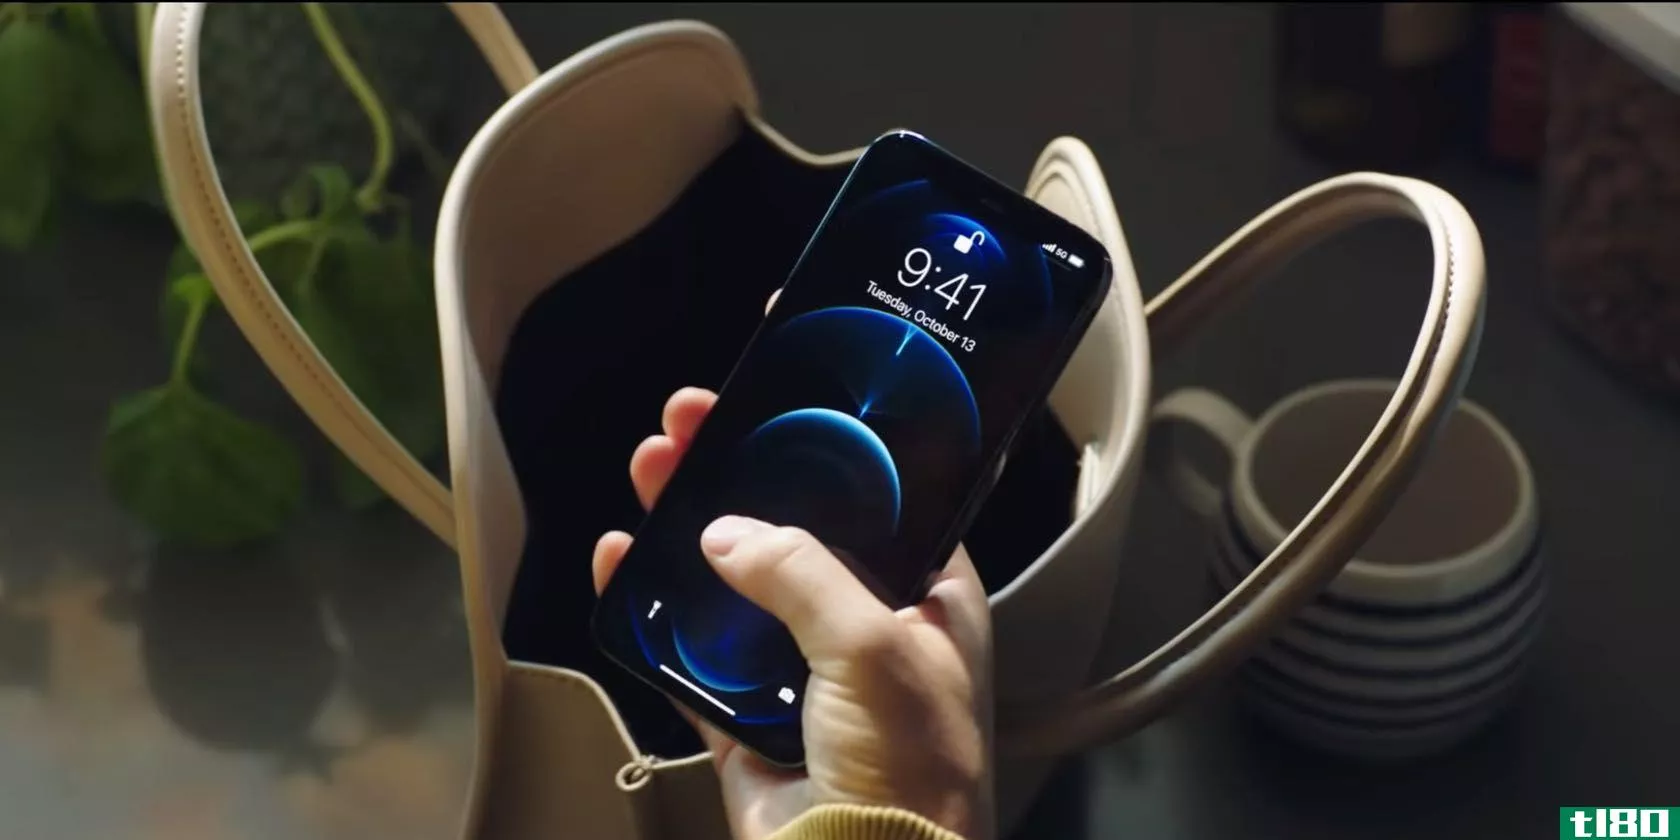 A still from an Apple ad showing a woman holding an iPhone 12 in her hand, pressing the Lock screen with a thumb